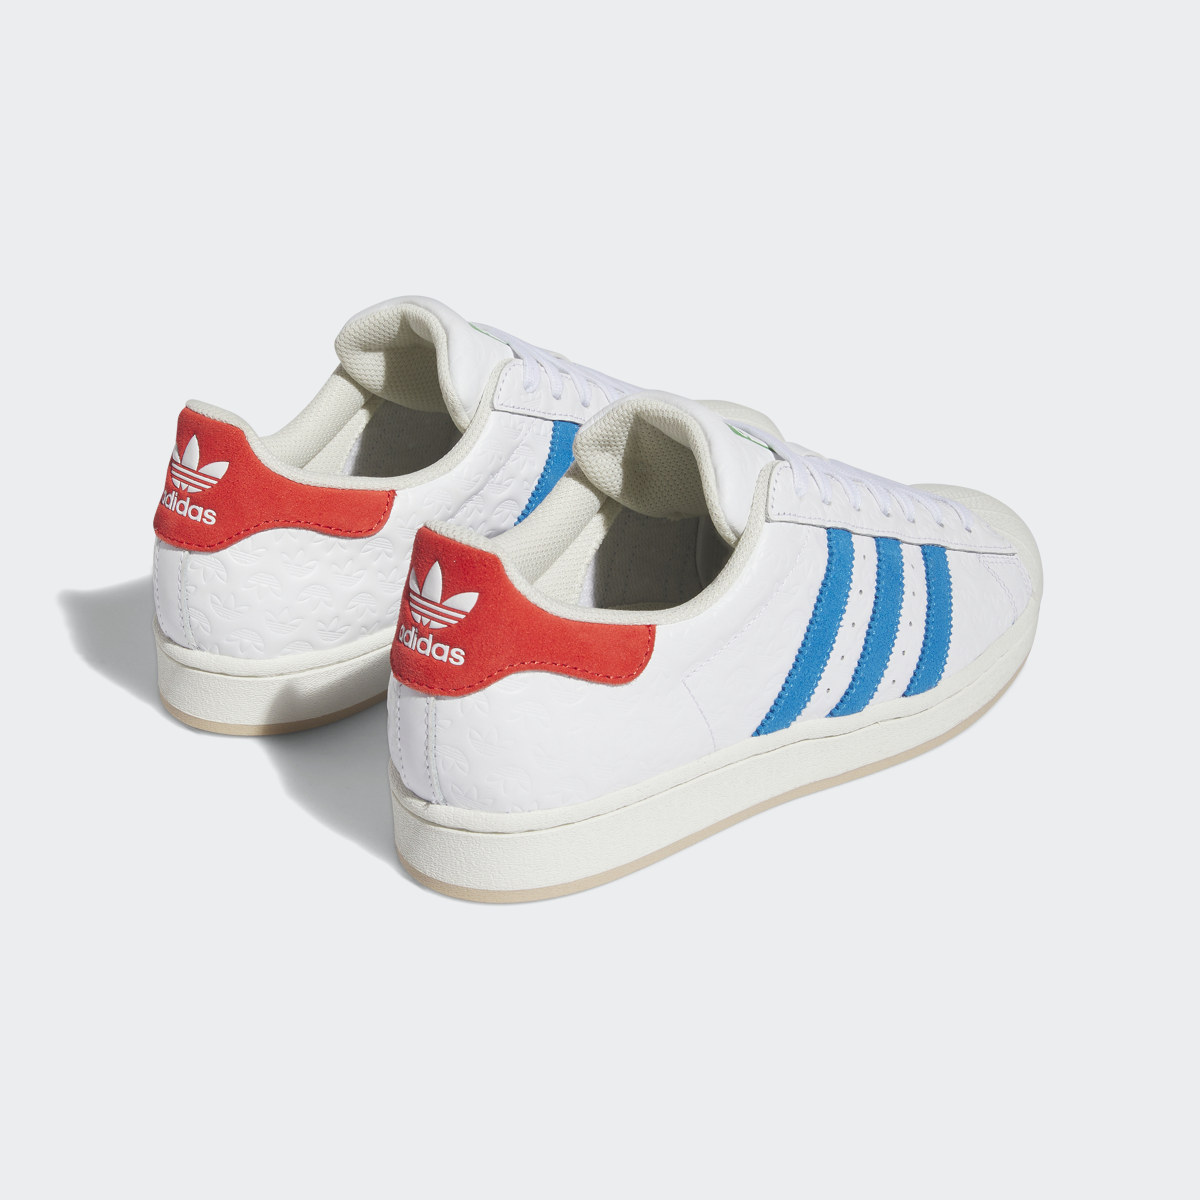 Adidas Superstar Shoes - ID7964